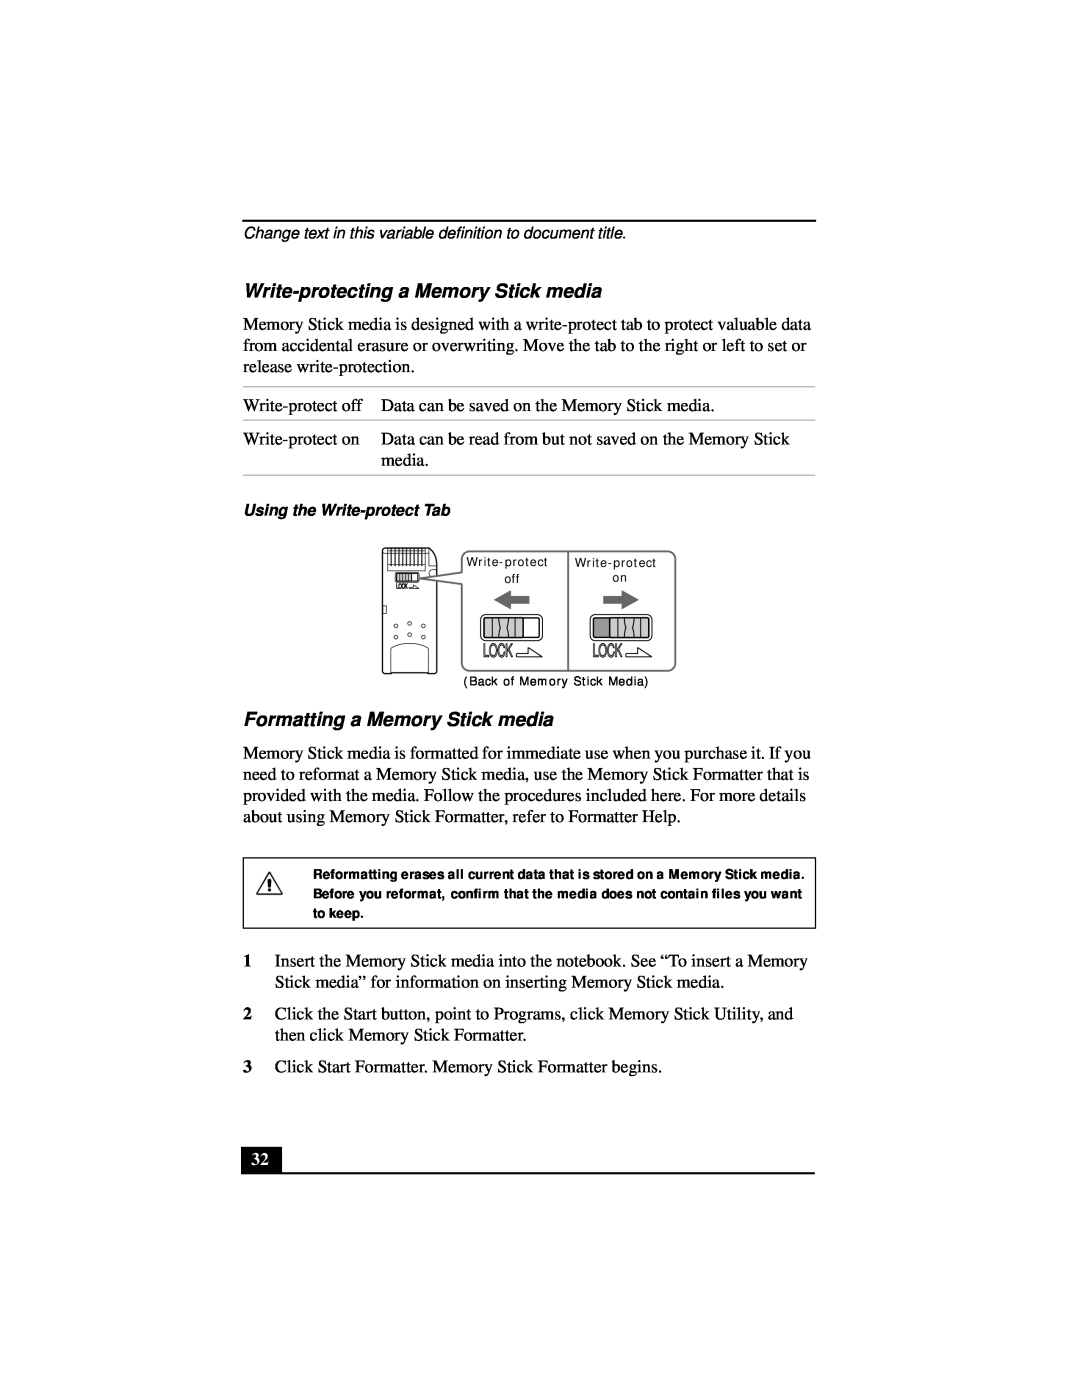 Sony Notebook Computer manual Write-protecting a Memory Stick media, Formatting a Memory Stick media, Lock 